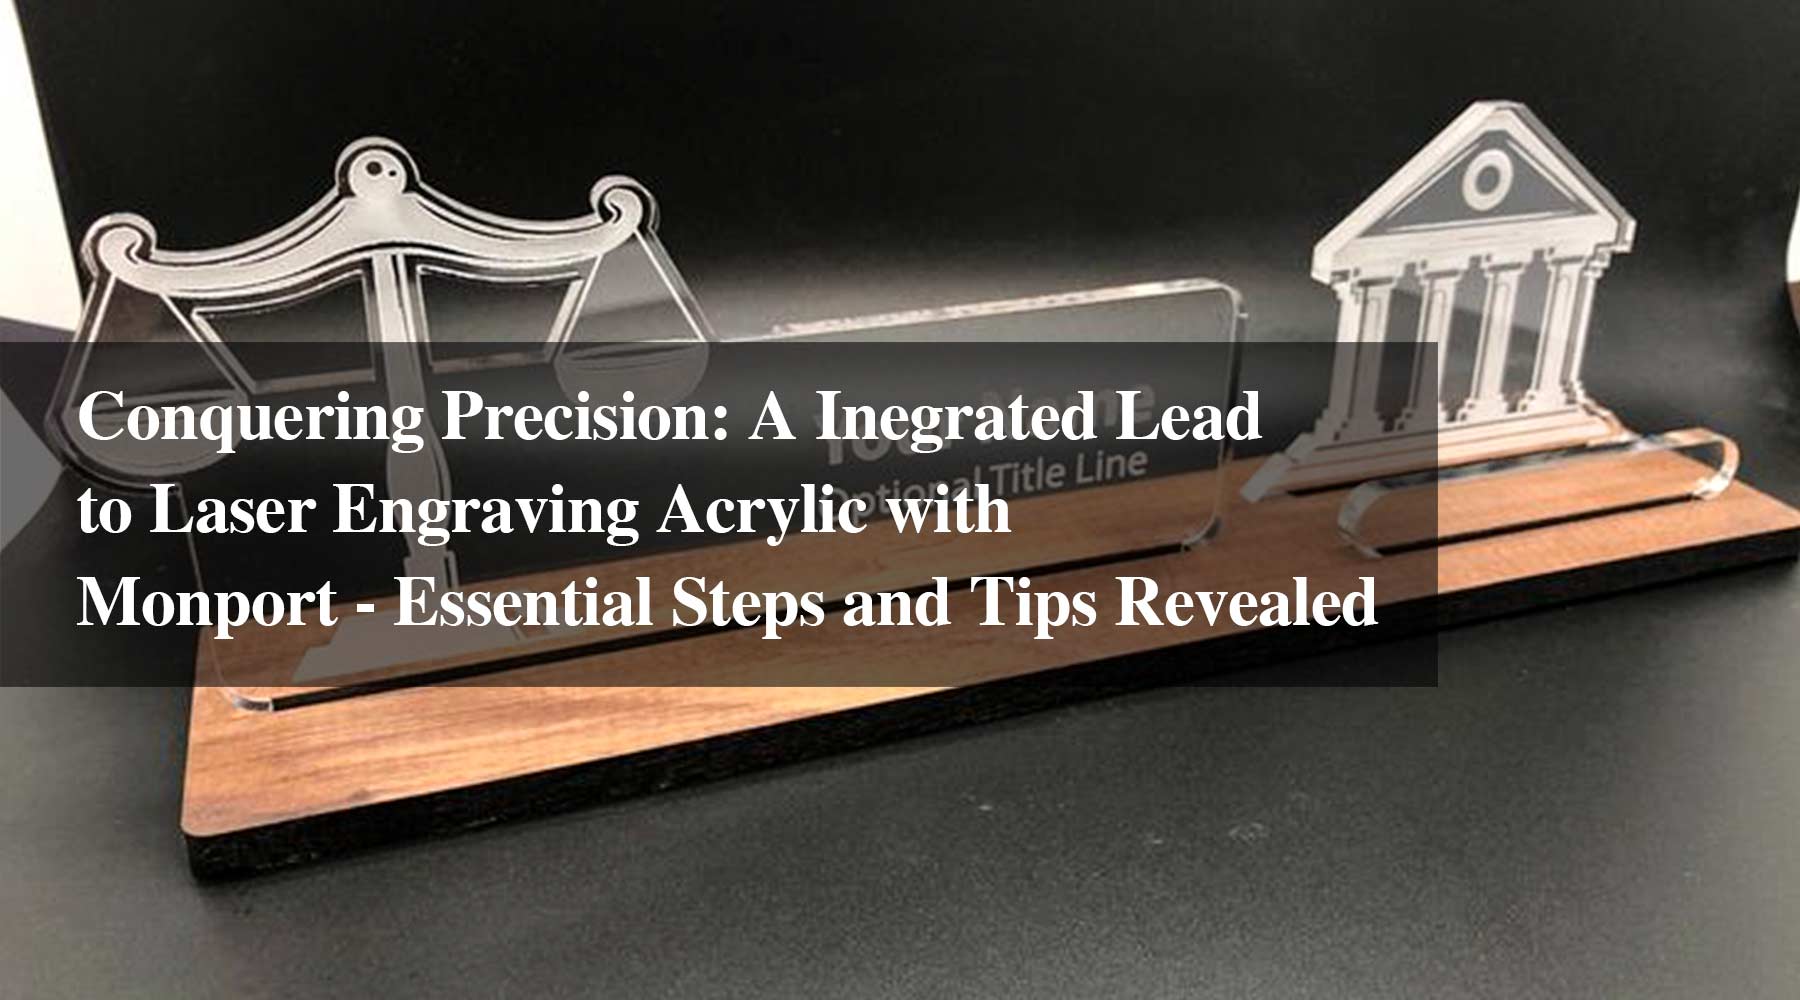 Conquering Precision: A Inegrated Lead to Laser Engraving Acrylic with Monport - Essential Steps and Tips Revealed